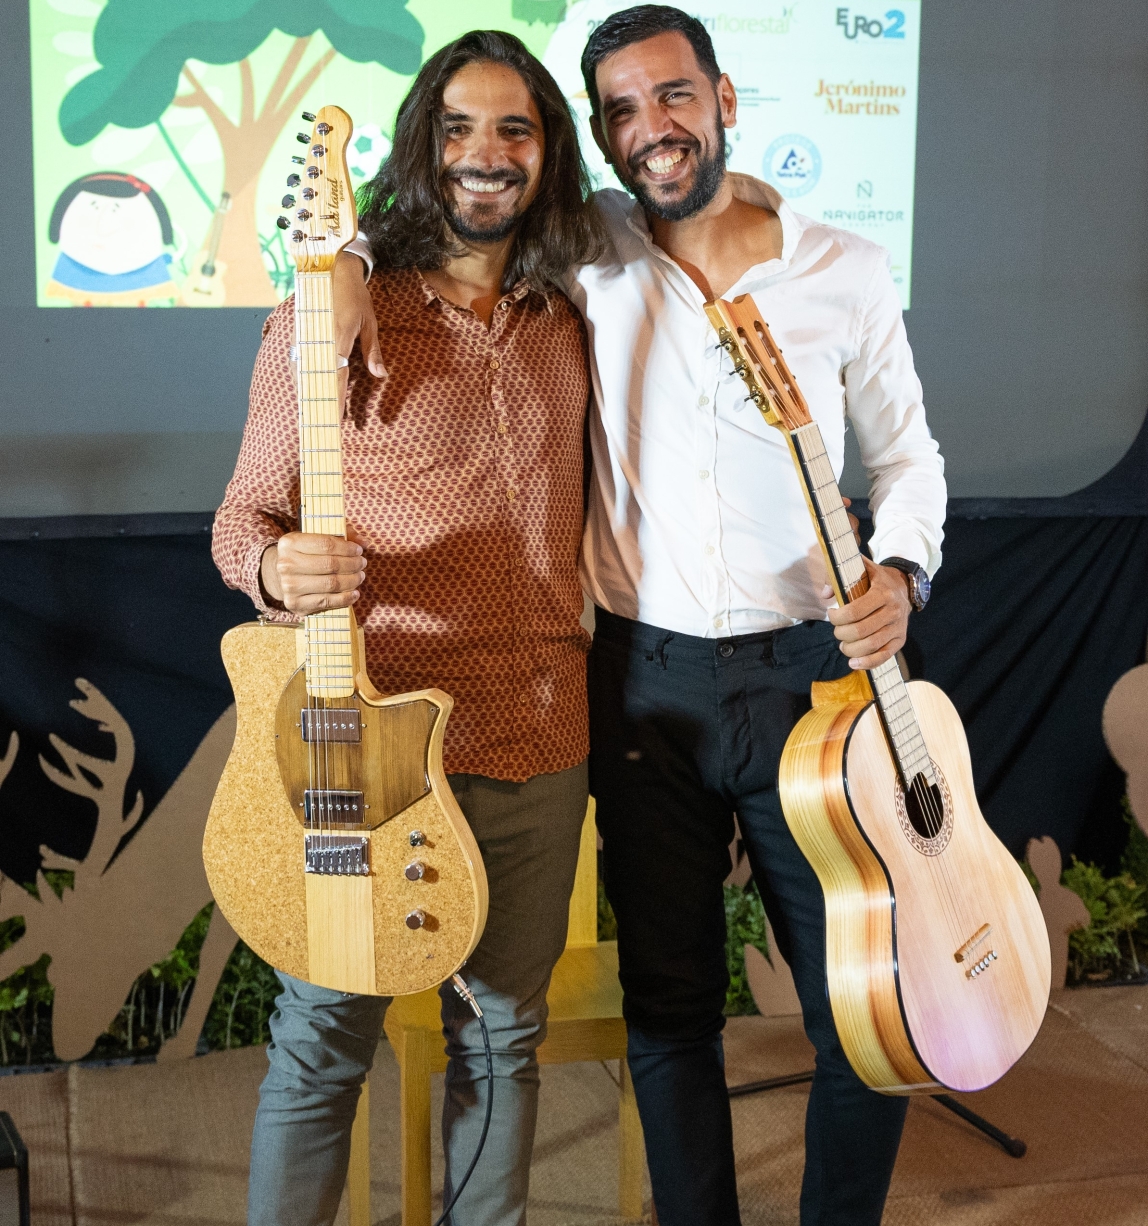 two men each holding a guitar smiling together for a picture